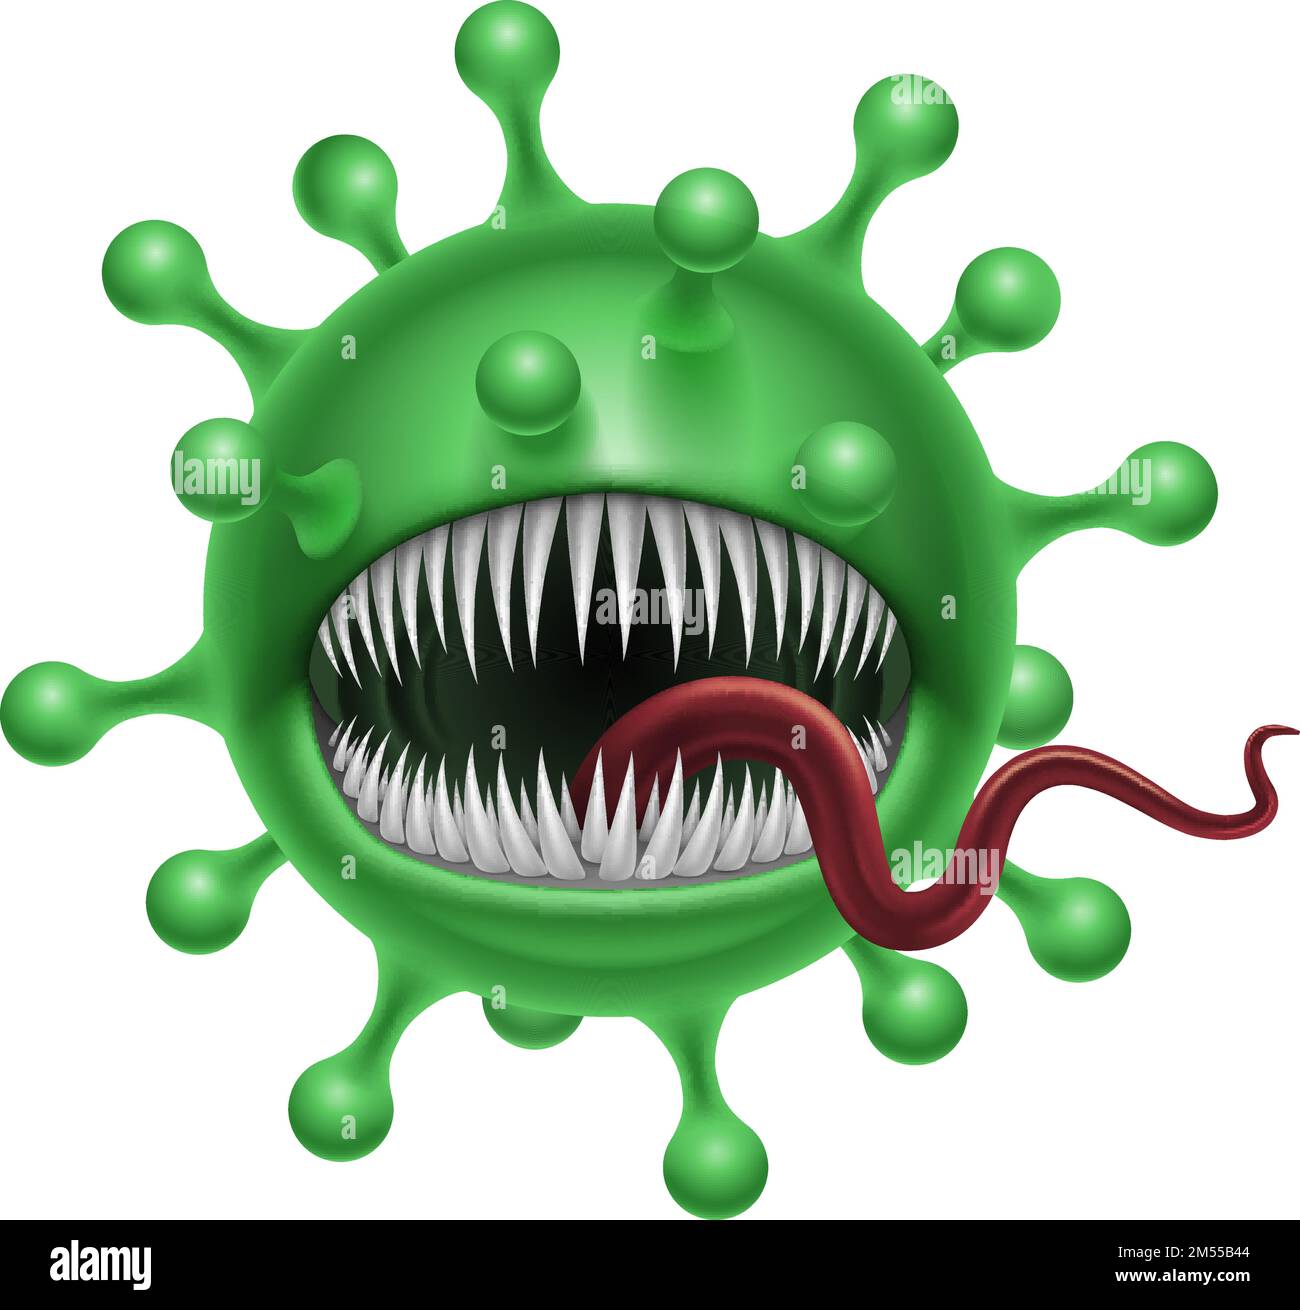 Corona Covid-19 Virus Monster With A Scary Face PNG Images